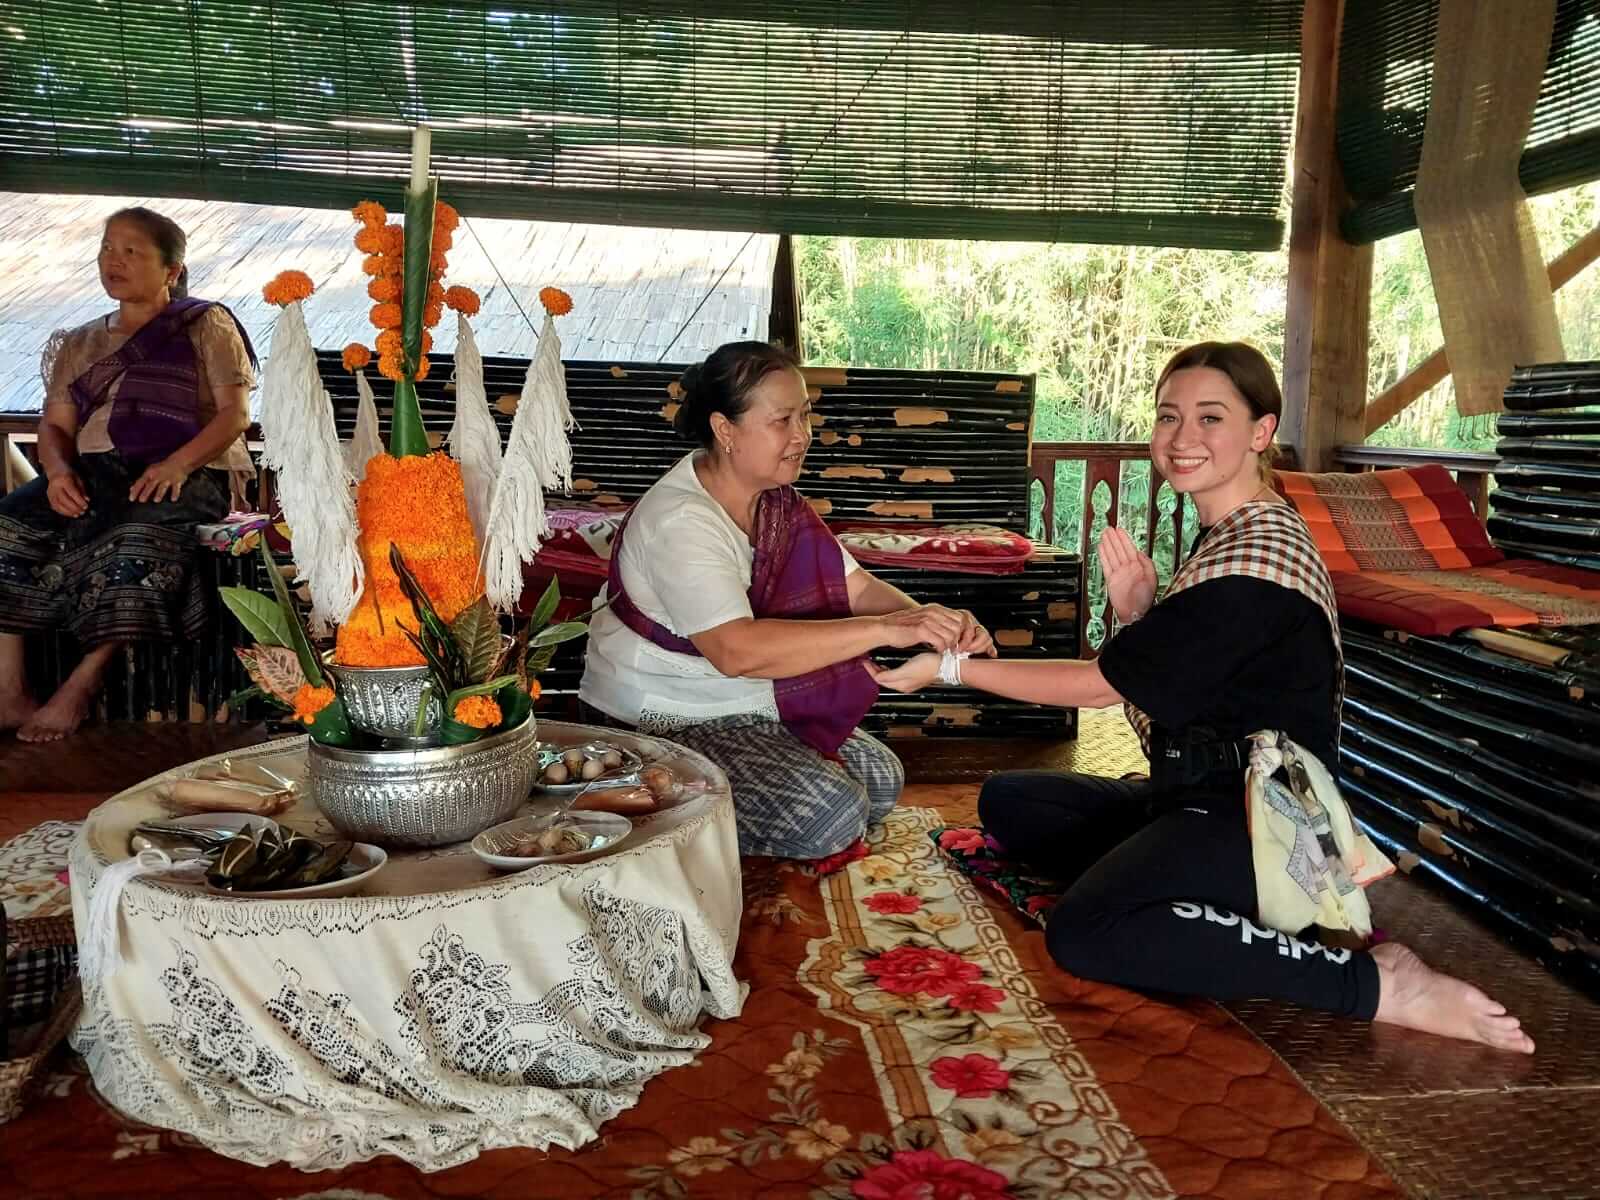 Baci ceremony with villagers in Luang Prabang, Laos.